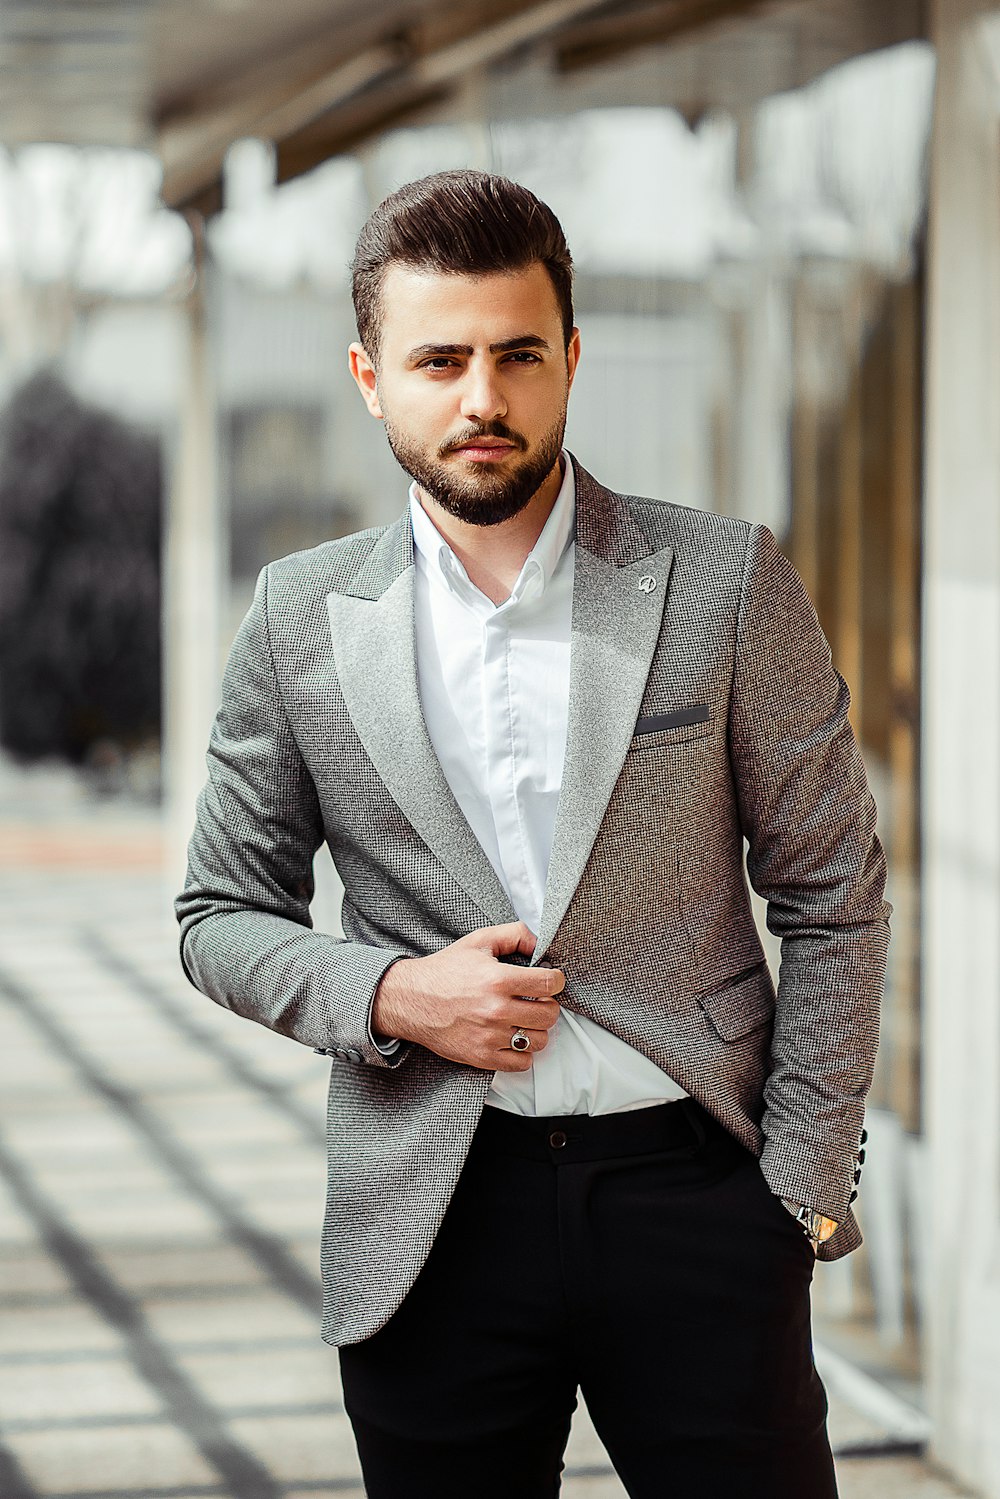 Man In Gray Suit Jacket And Black Pants Wearing Black Sunglasses Standing  On Gray Concrete Stairs Photo – Free استان تهران، ایران Image On Unsplash |  gartenjournal.at